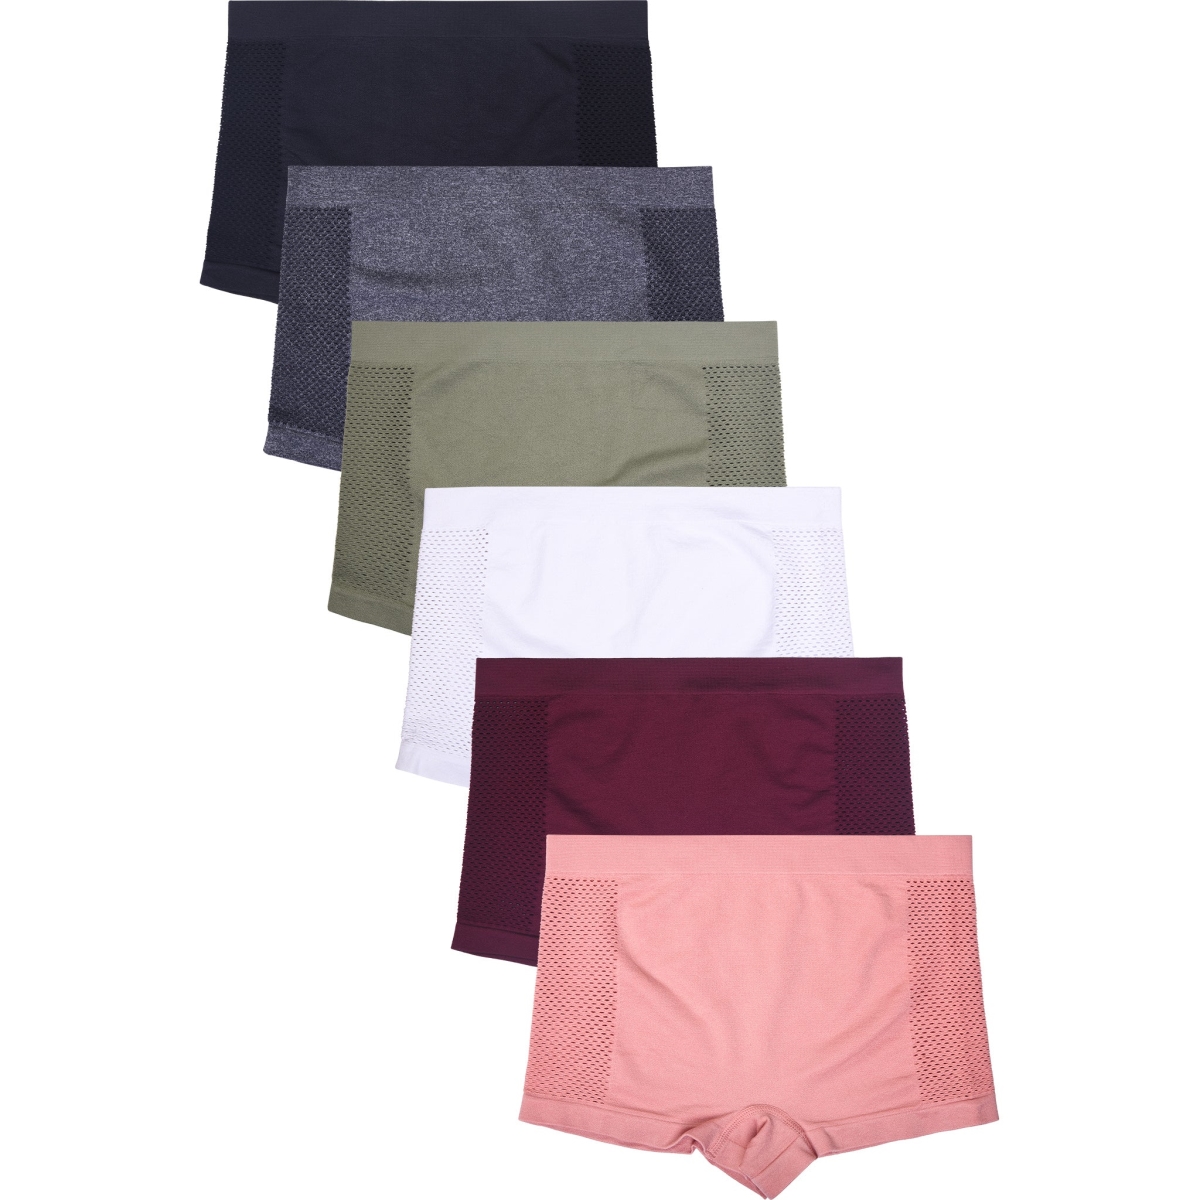 Picture of 247 Frenzy 247-LP0234SB2 Mamia Womens Seamless Nylon Stretch Boyshort Panty Underwear - Assorted Color - One Size - Pack of 6